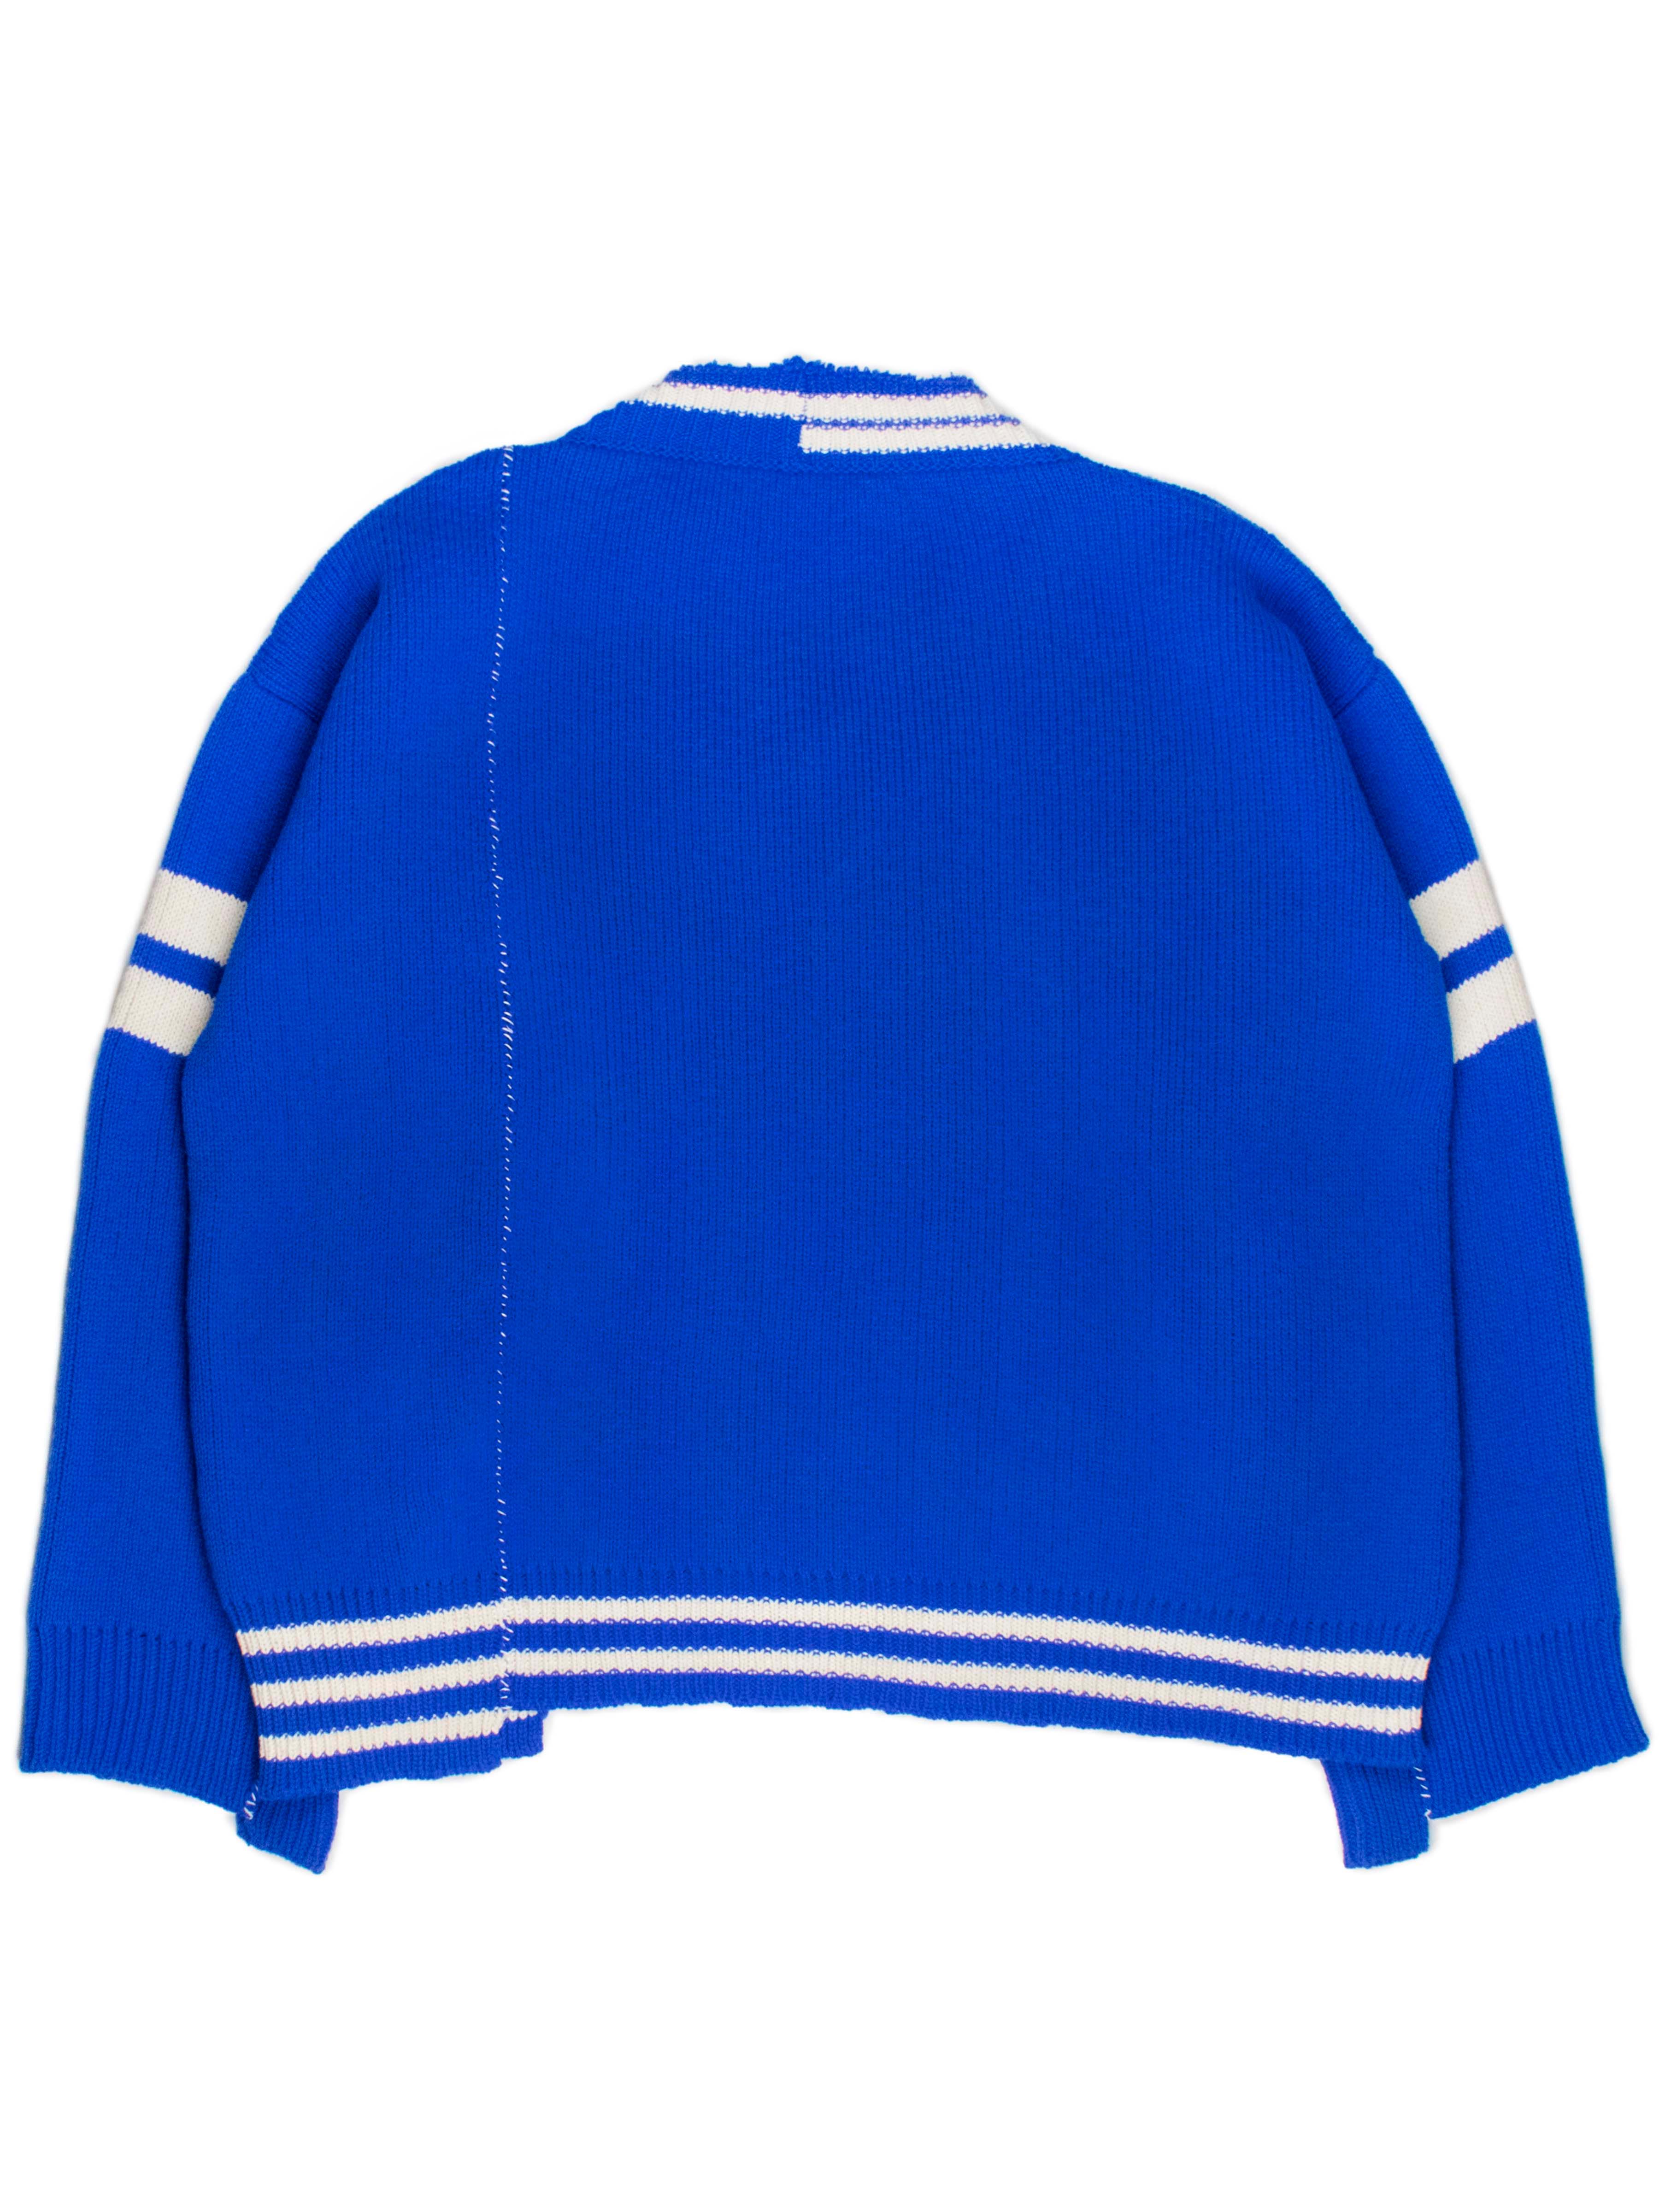 raf simons patched varsity sweater